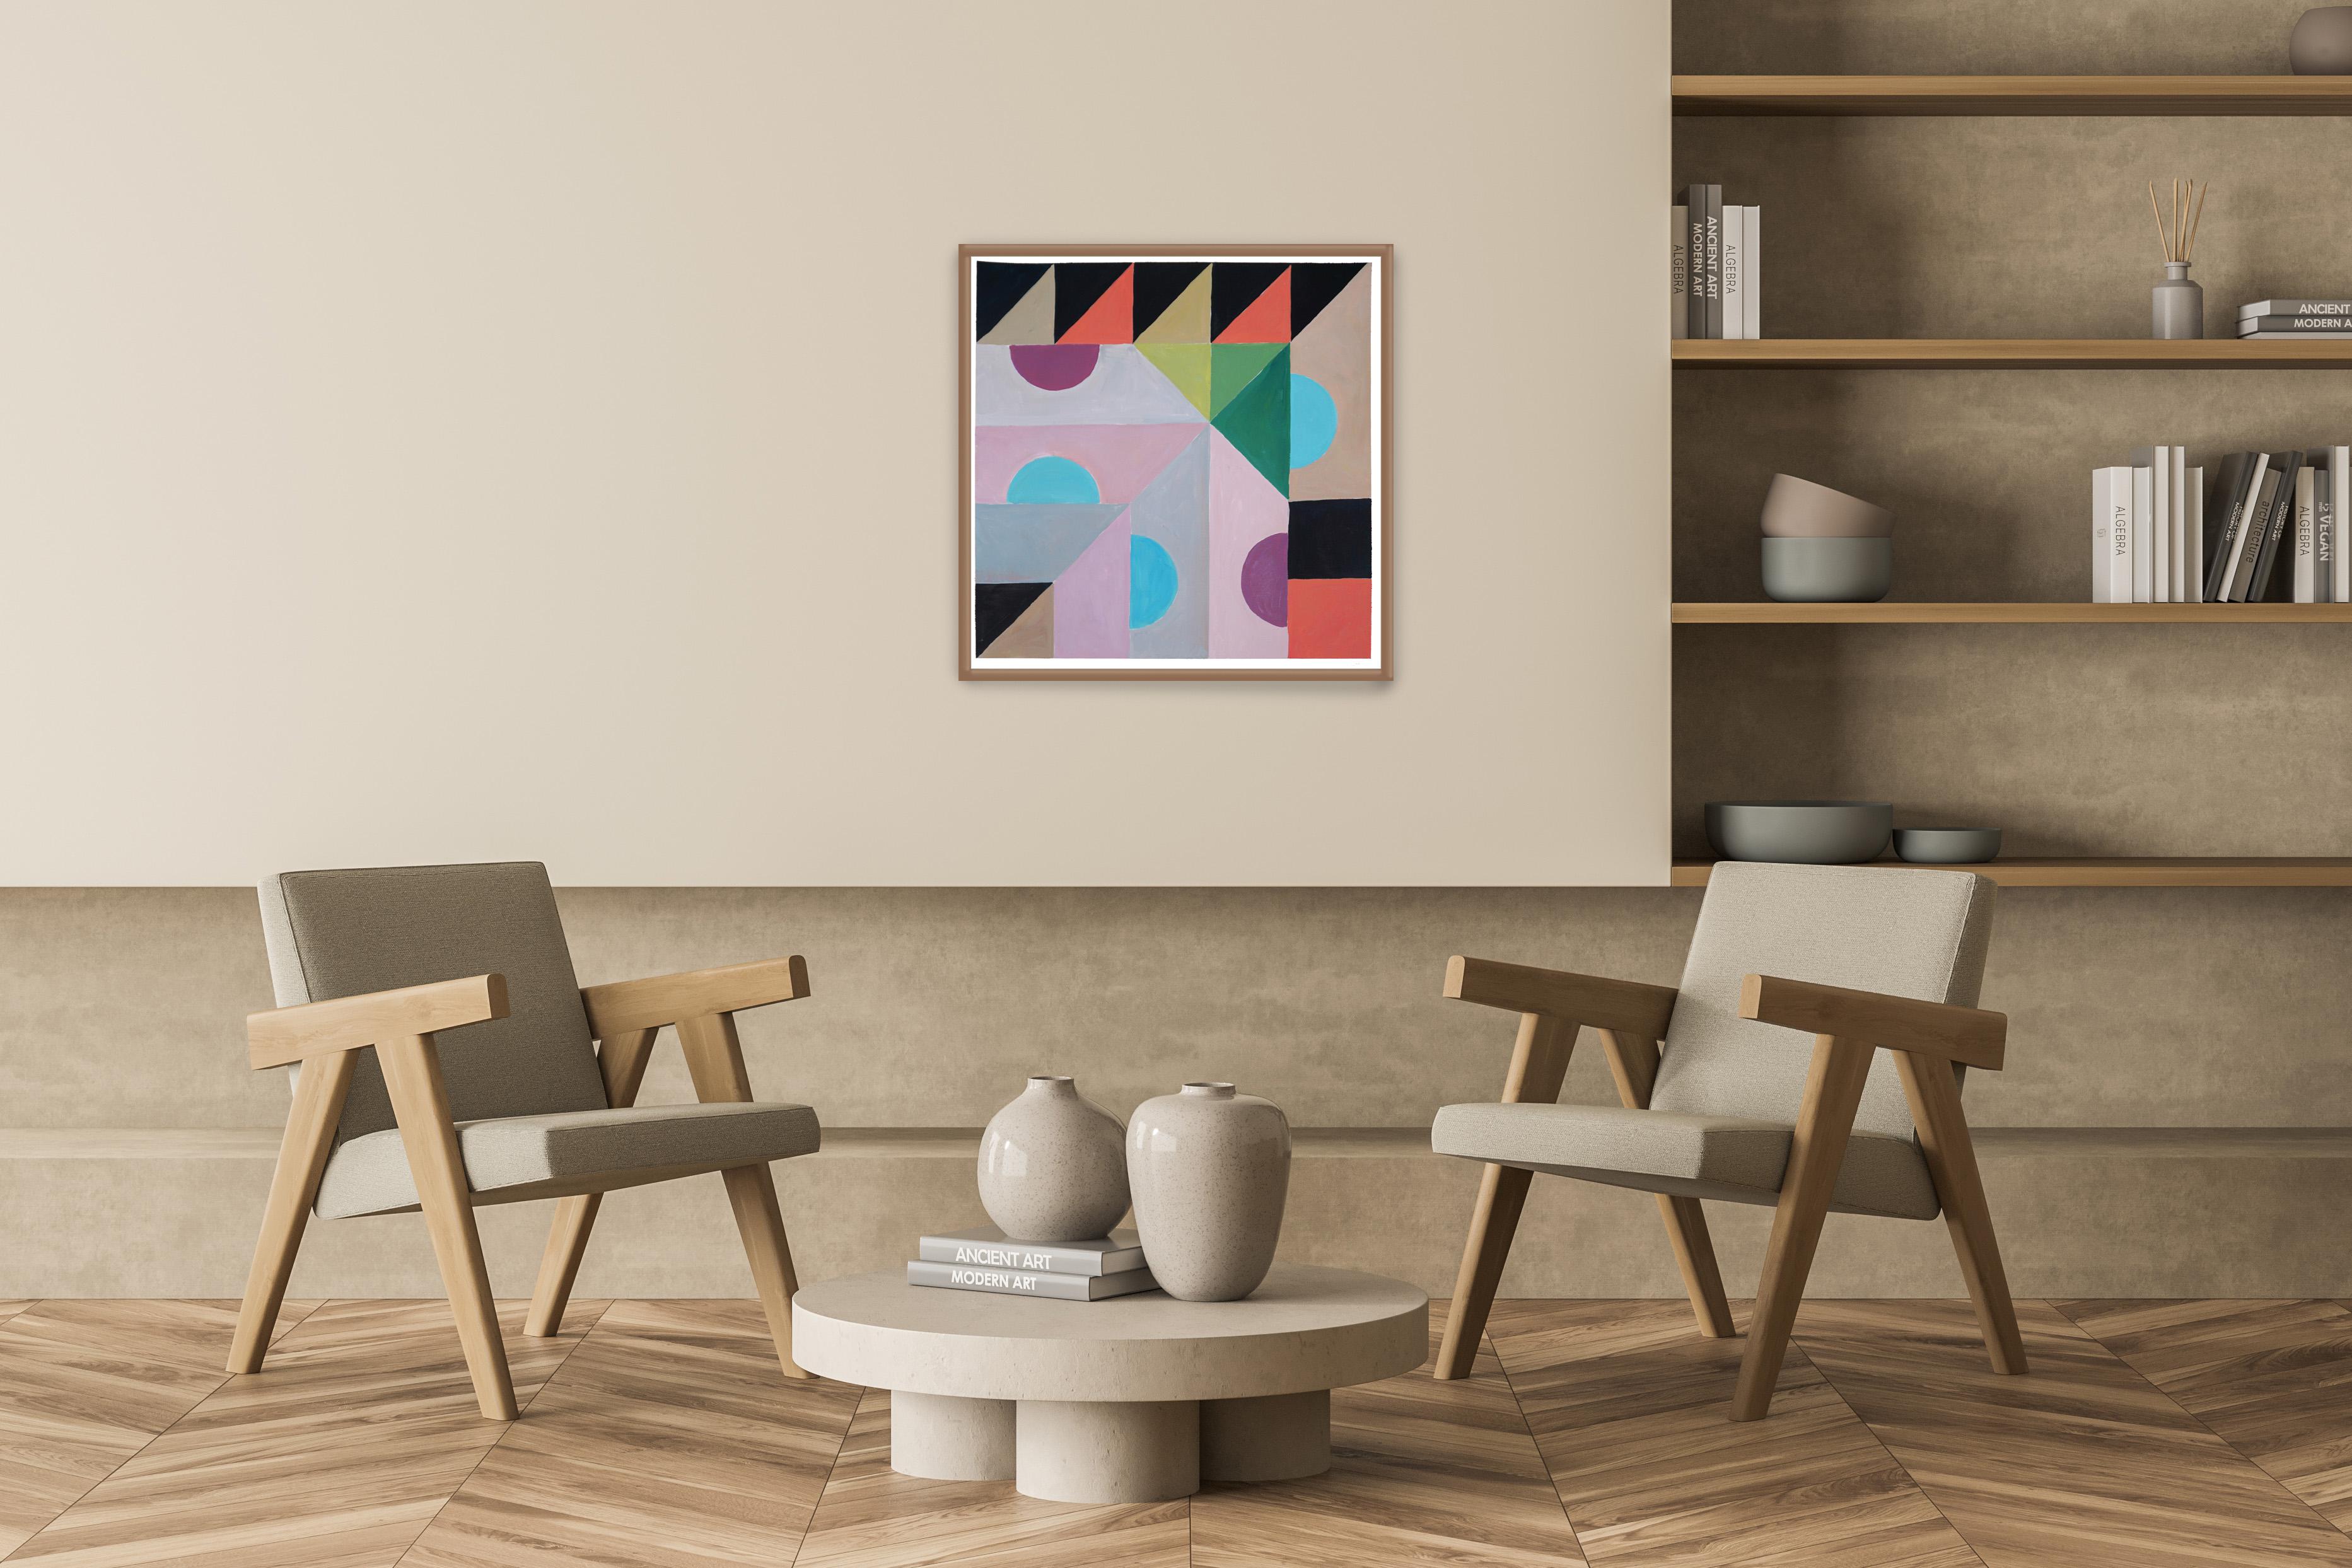 Geometric Board Game, Cold Tones Grid Pattern, Tribal Shapes, Purple, Coral Blue - Gray Abstract Painting by Natalia Roman